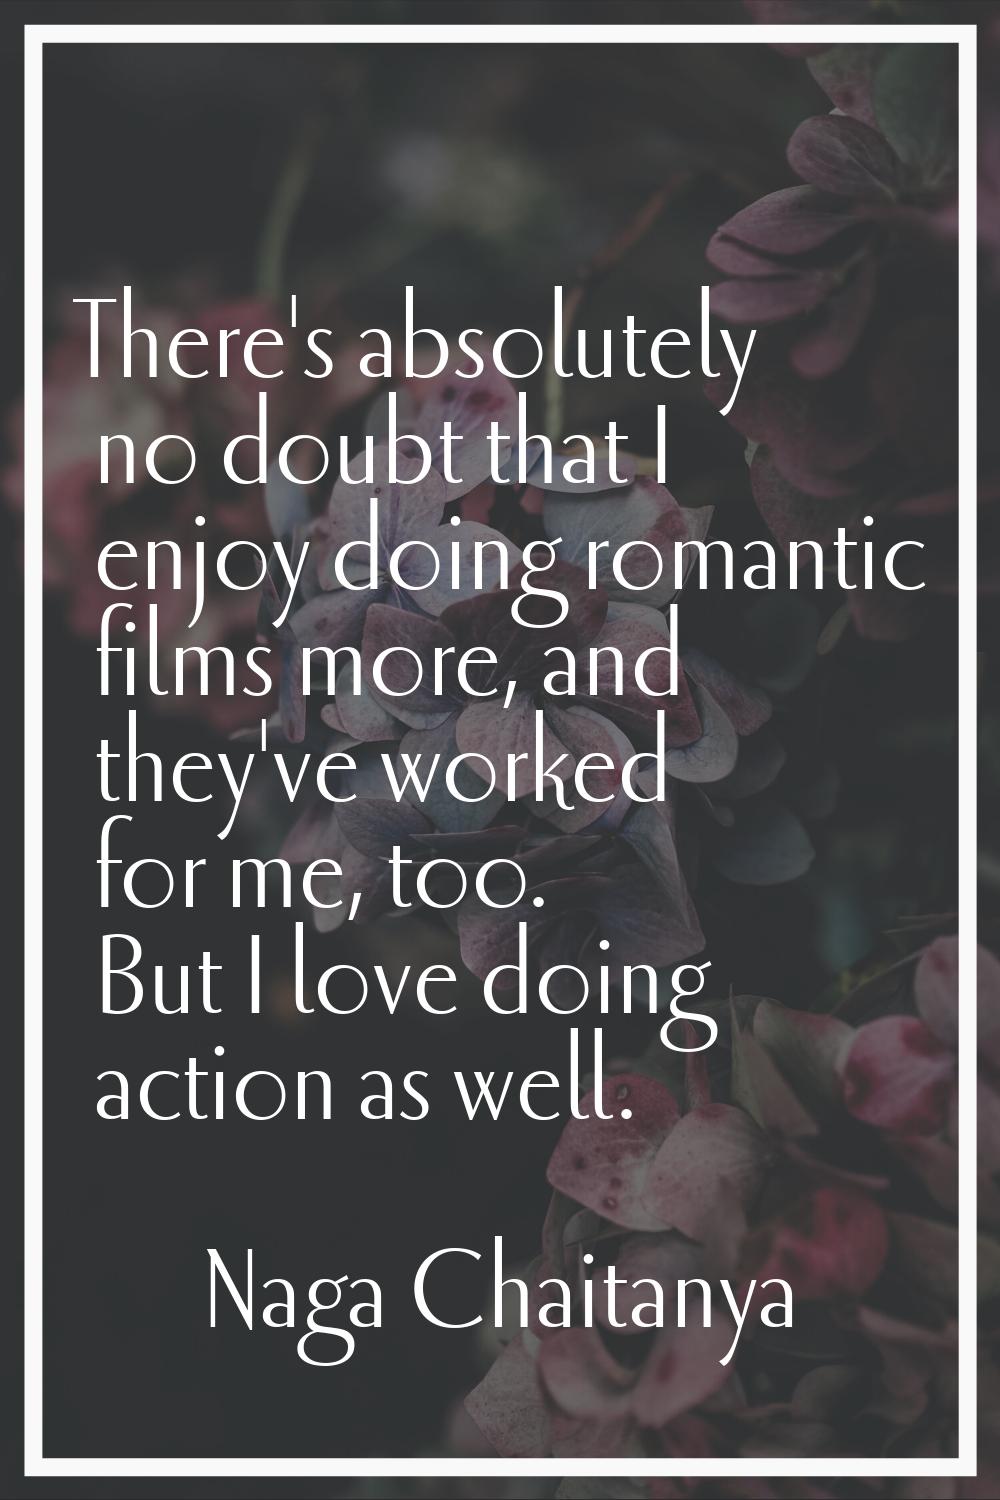 There's absolutely no doubt that I enjoy doing romantic films more, and they've worked for me, too.